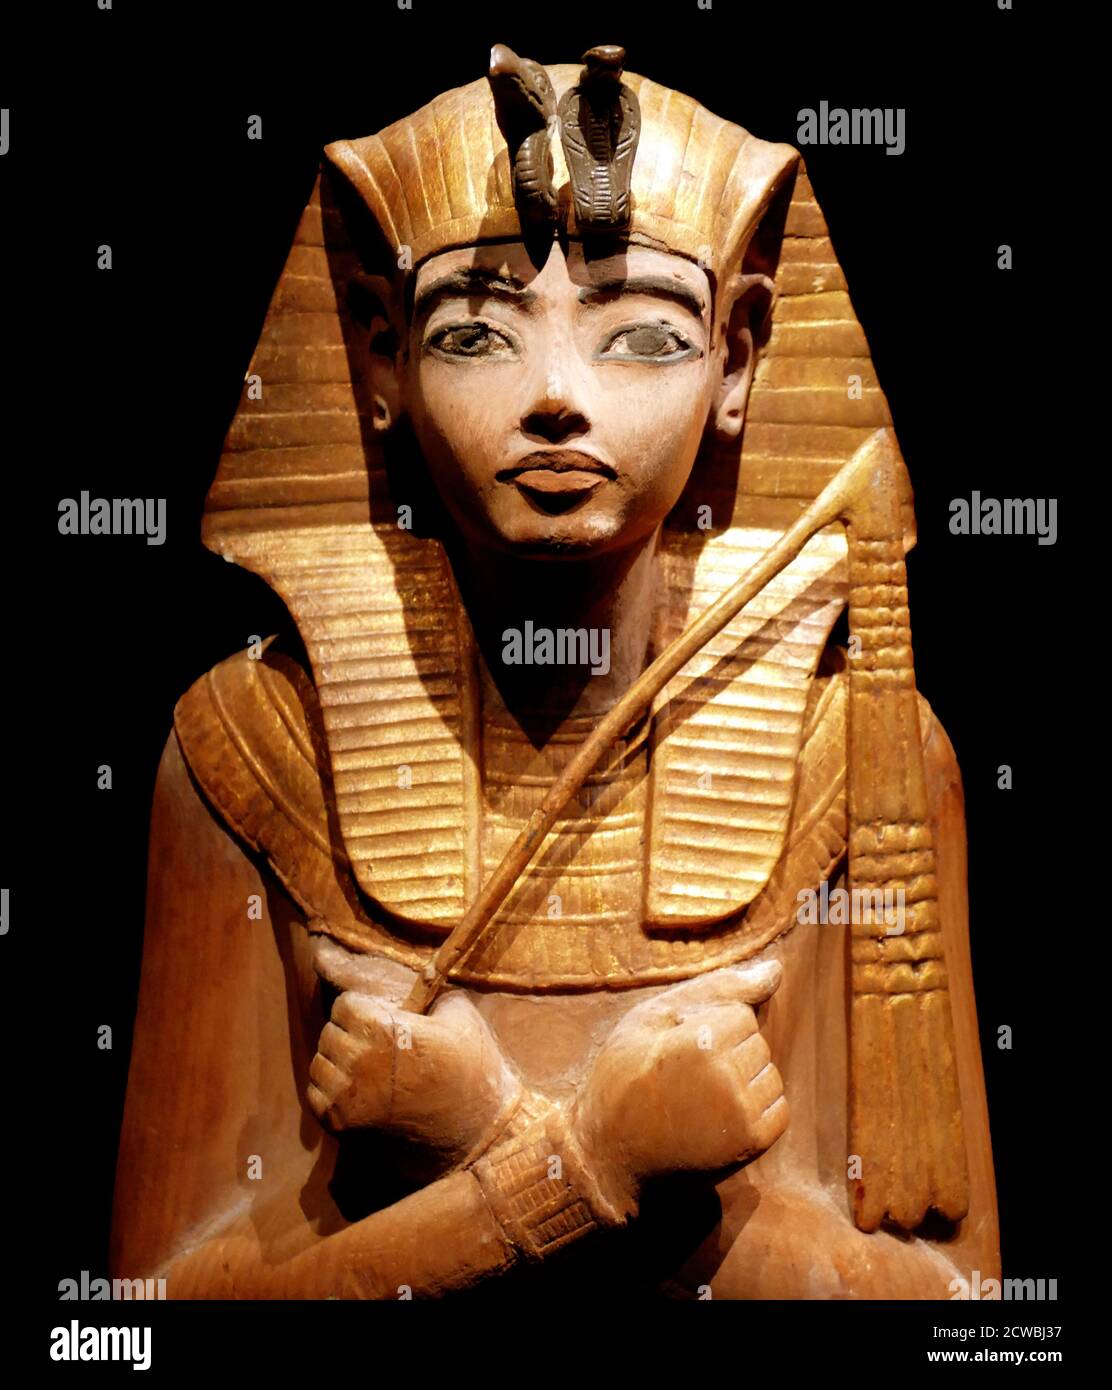 painted wooden Shabti figure, with gilded nemes headdress and collar. from the reign of Tutankhamun 1336-1326 BC. Stock Photo